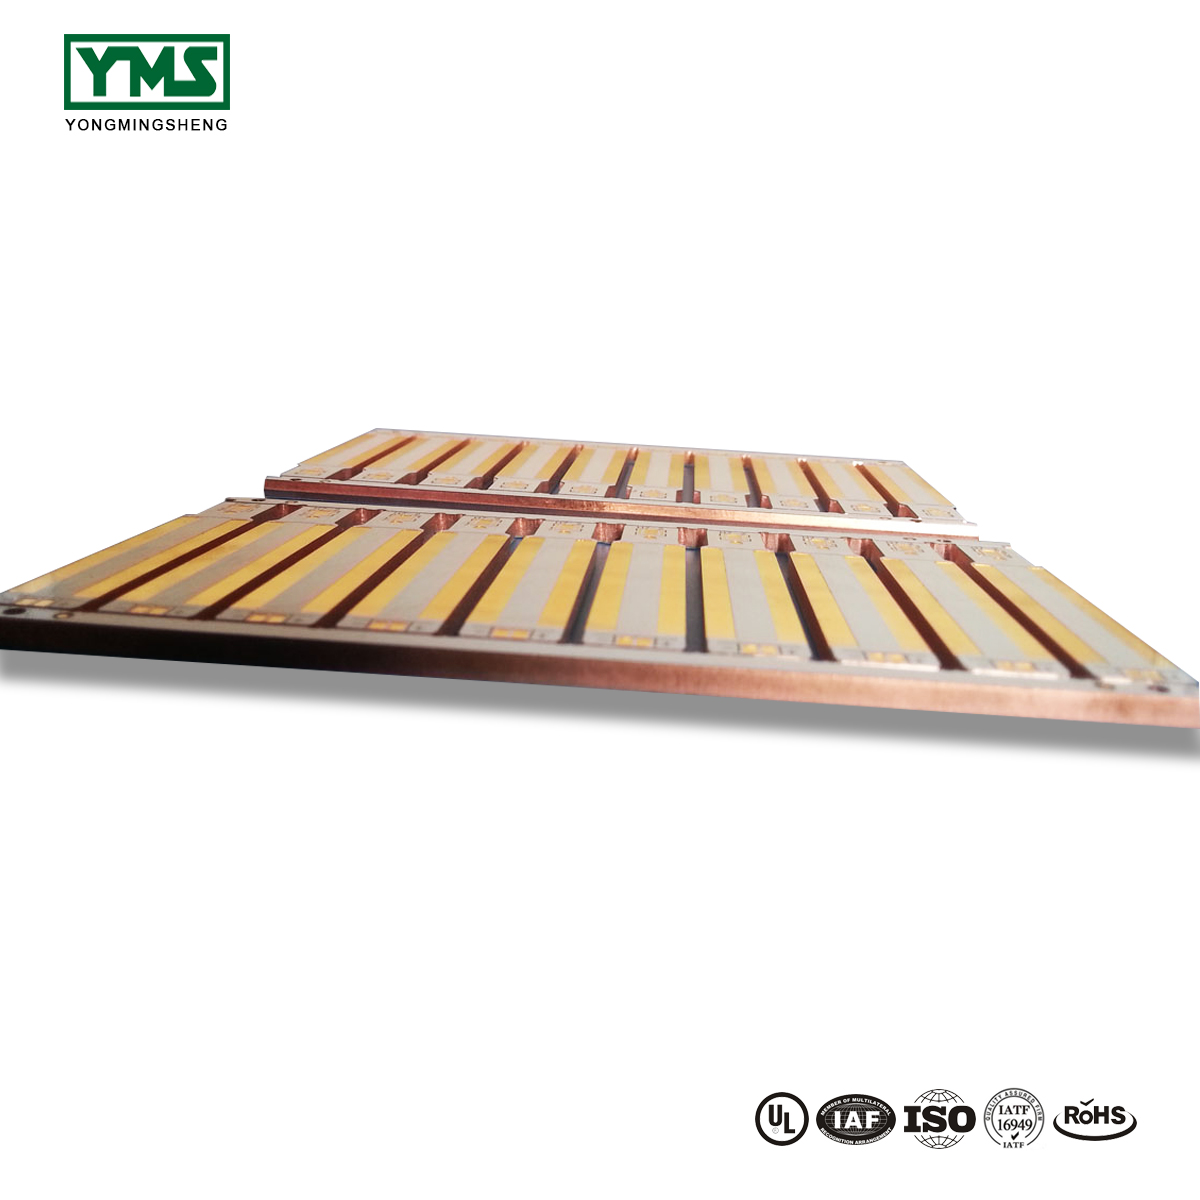 Newly Arrival94vo Printed Circuit Board - Copper Base High Power (Metal core) Board | YMS PCB – Yongmingsheng